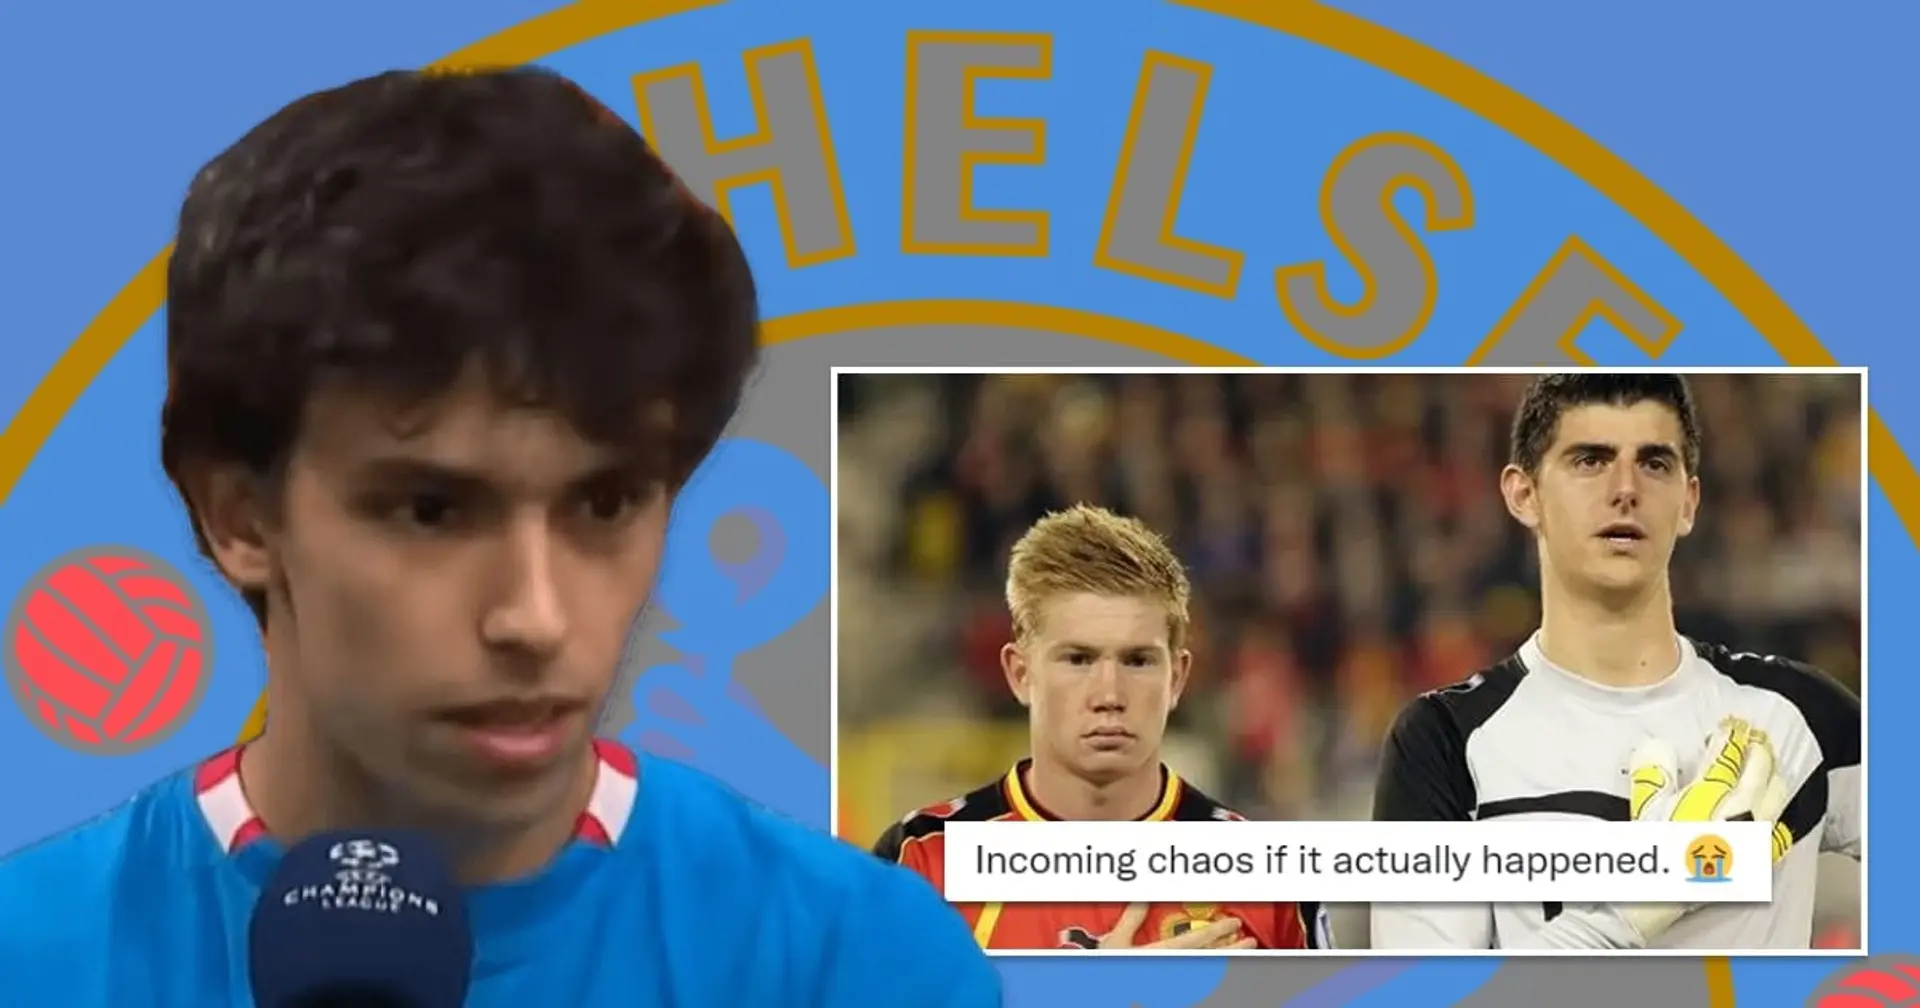 Chelsea might have Courtois-De Bruyne tension in dressing room with Joao Felix and new linked player